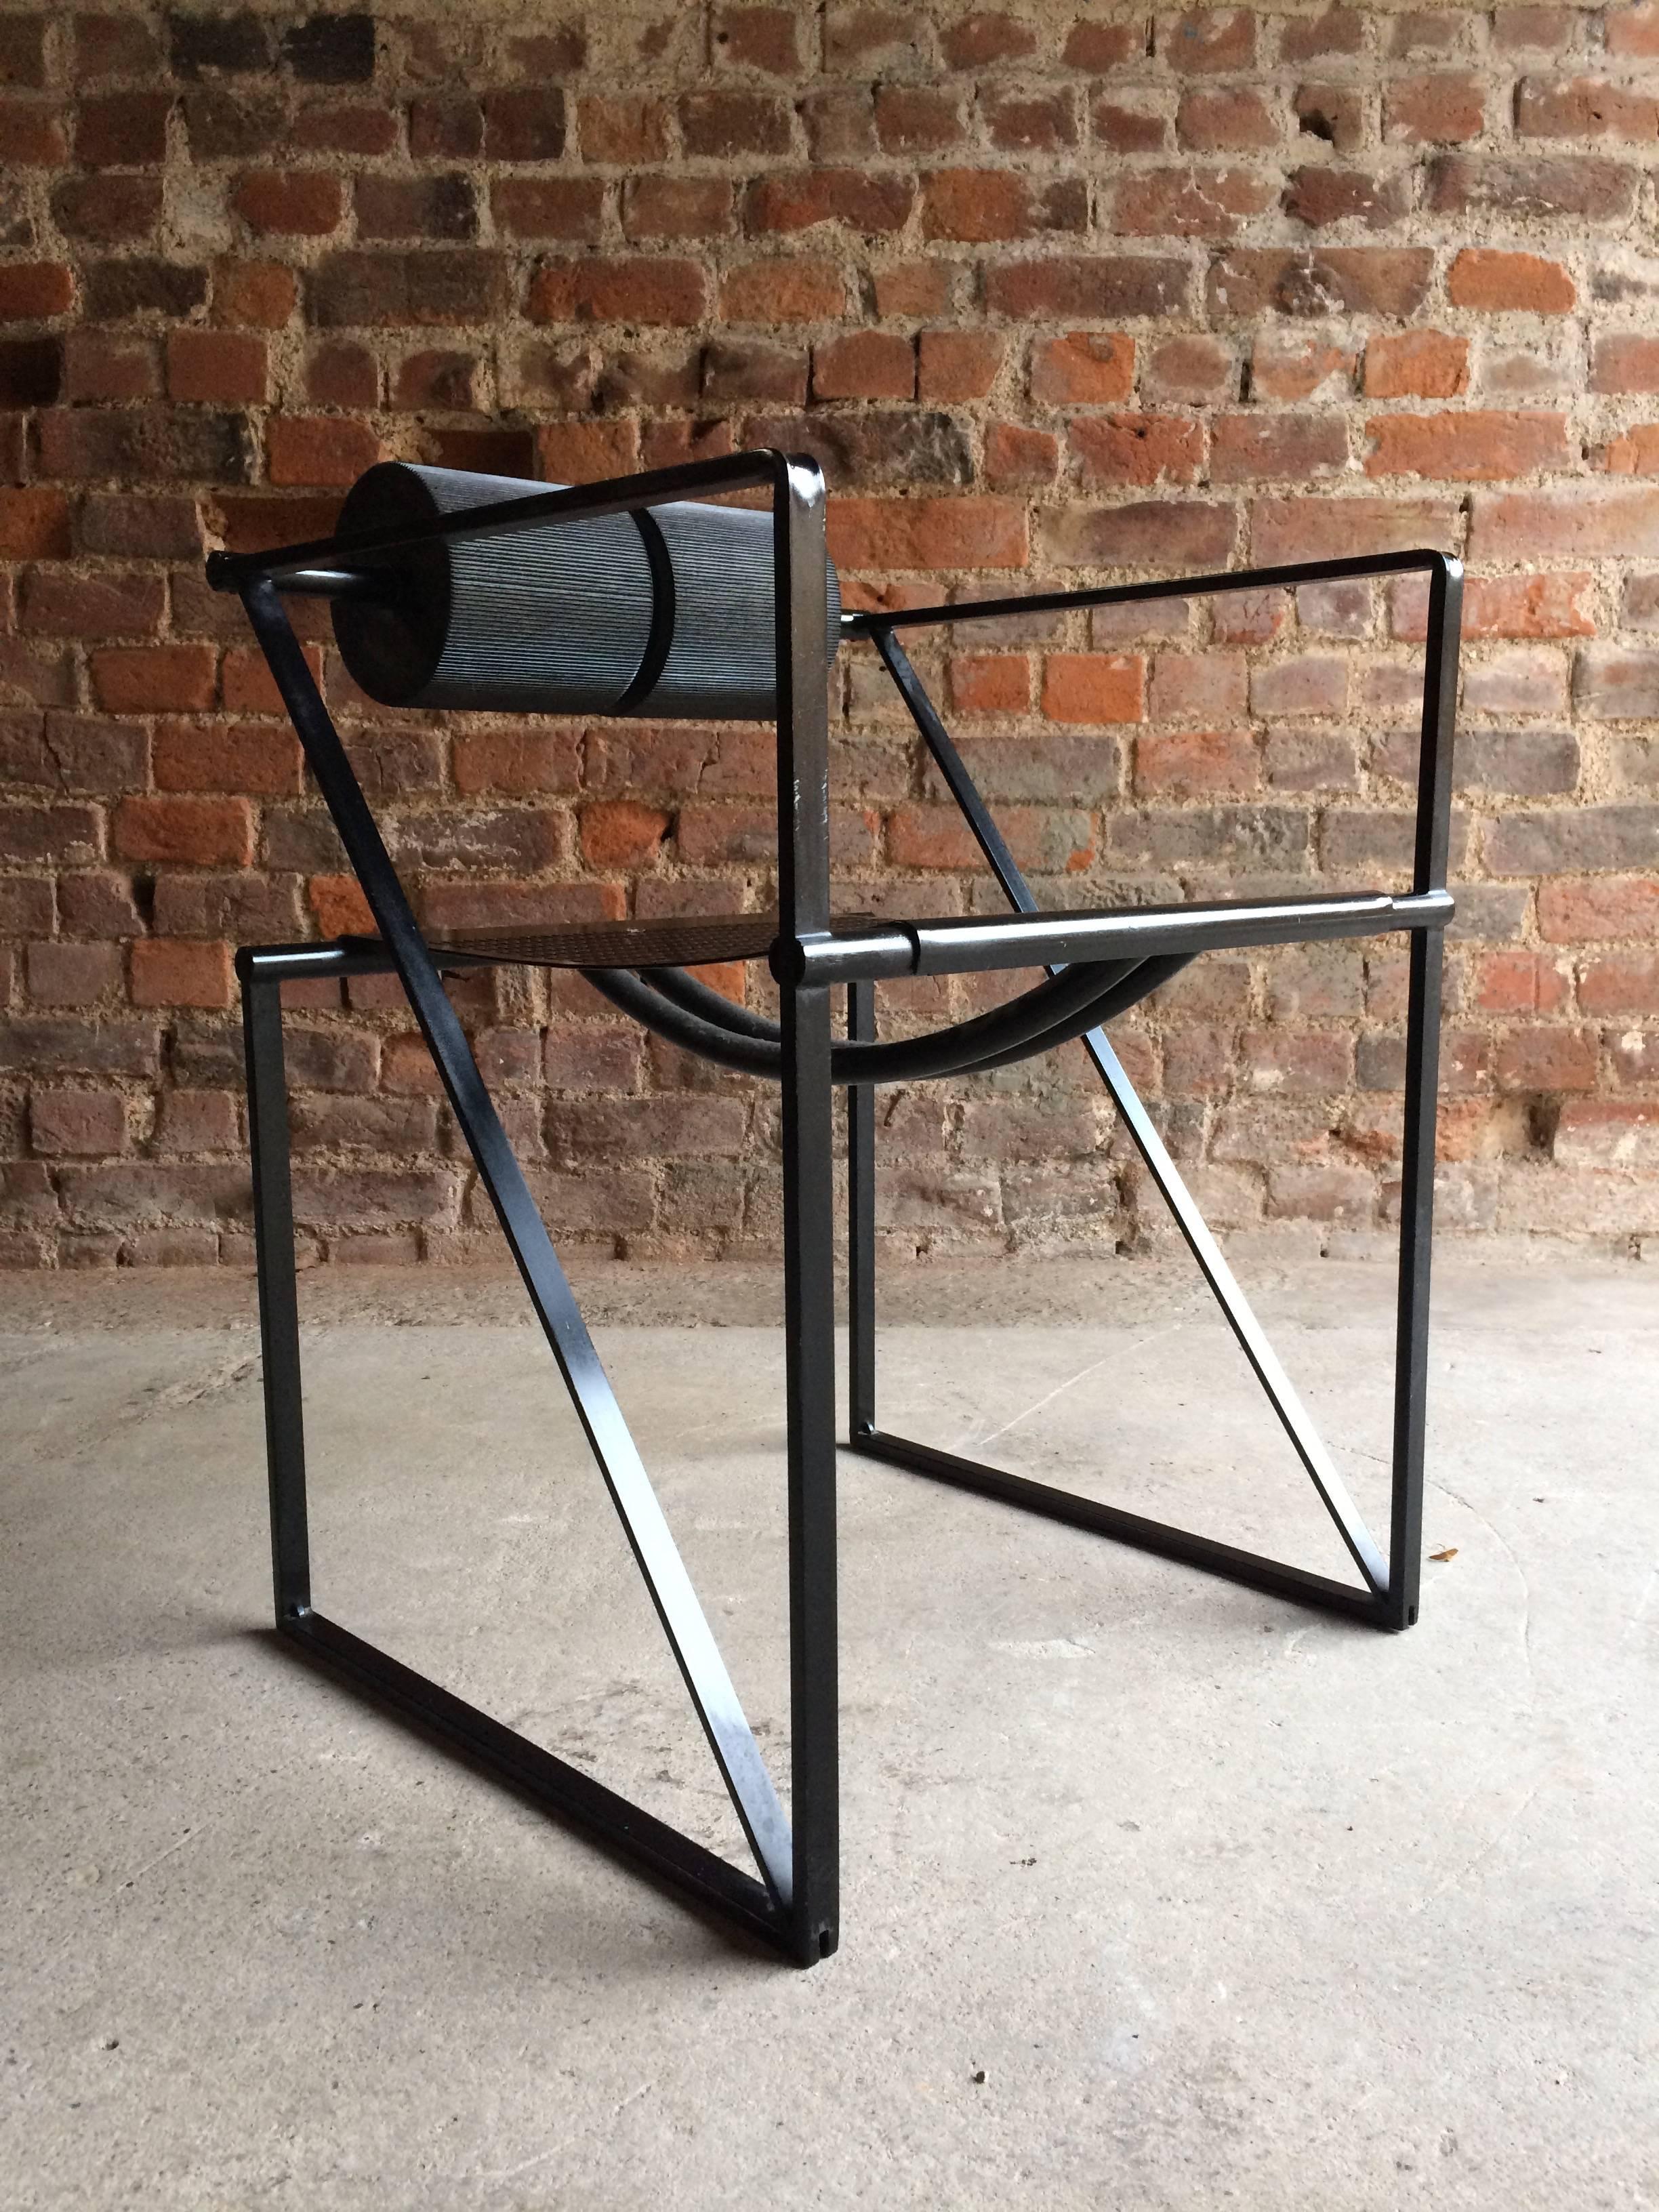 Fabulous model 602 black steel frame with foam back Seconda chair by Mario Botta for Alias, Italy, circa 1982.

Original
Midcentury
Mario Botta
Armchair
Steel
1980s.
Practical and beautiful.

Dimensions:

Height 28.5” inches (Floor to